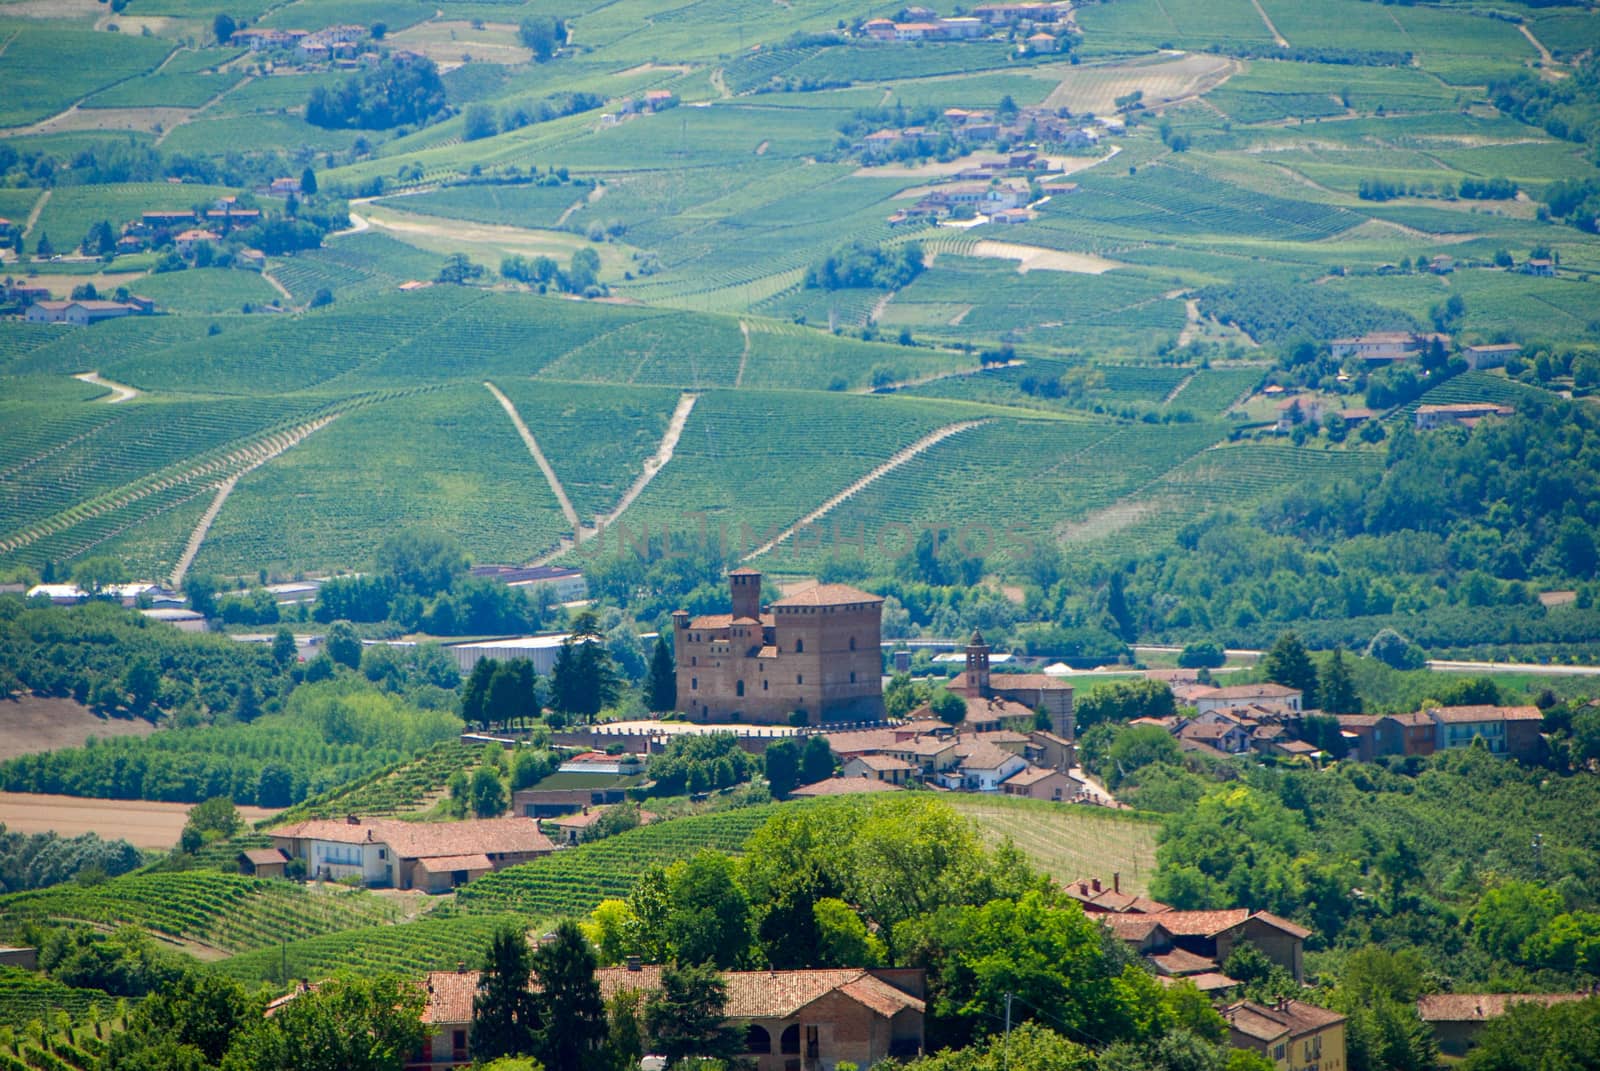 View of the Langhe hills with the Castle of Grinzane Cavour by cosca